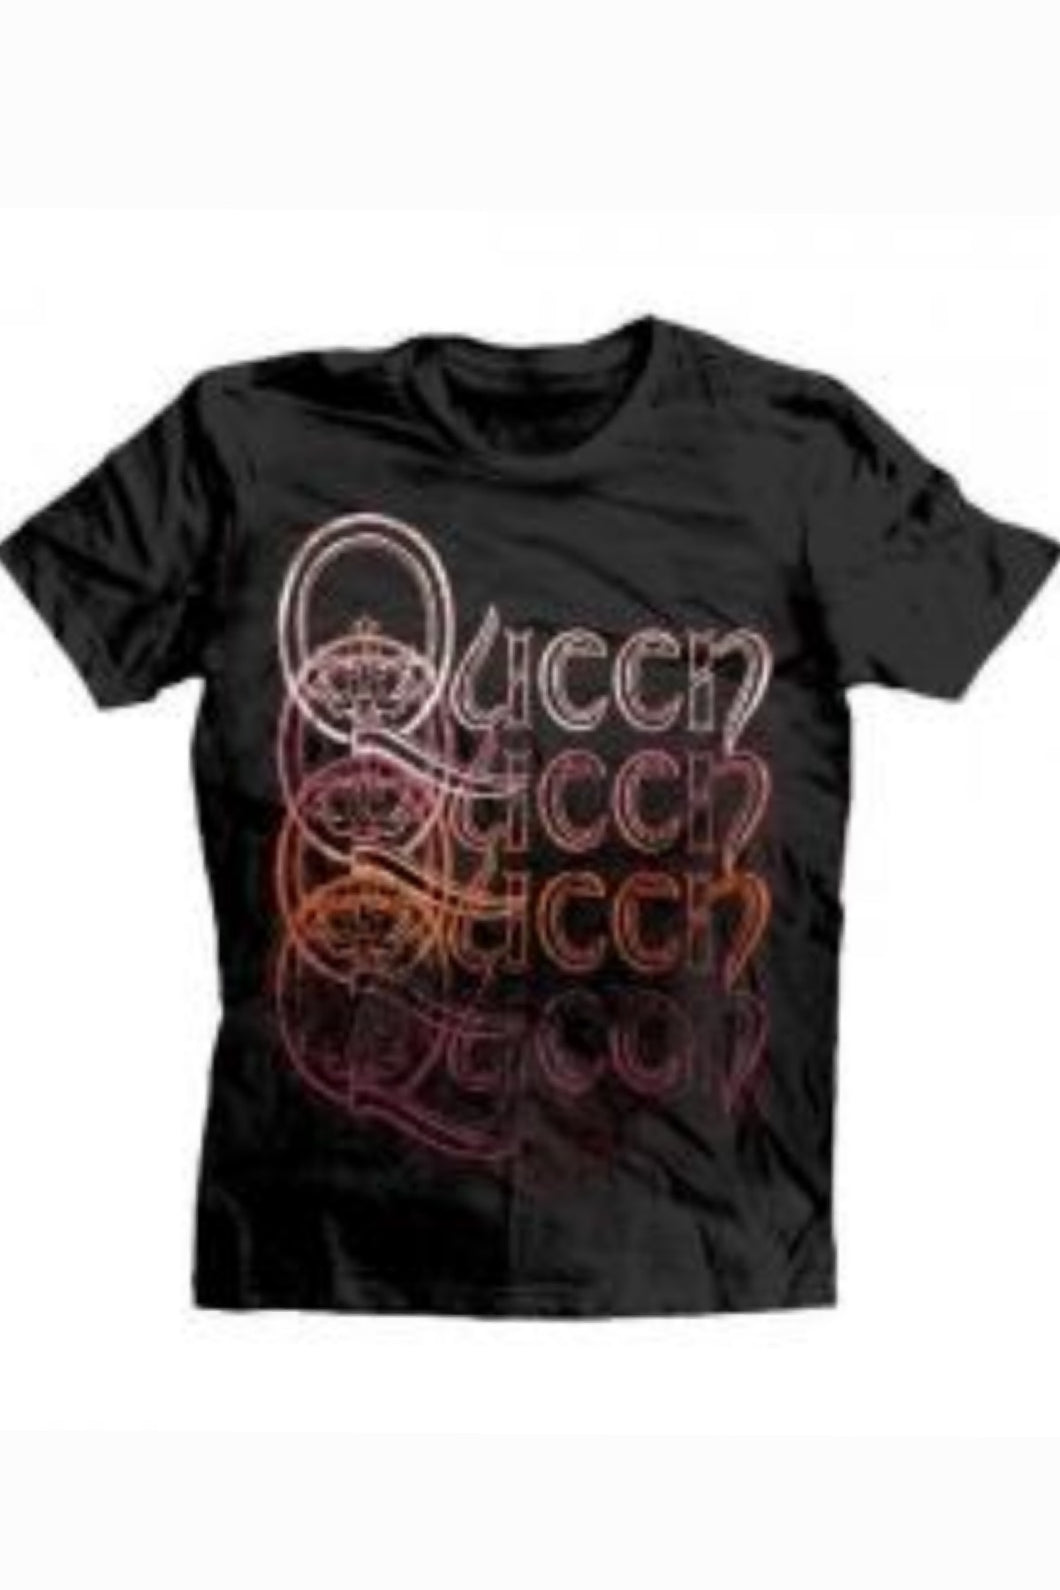 Queen On Repeat Throwback Graphic Tee